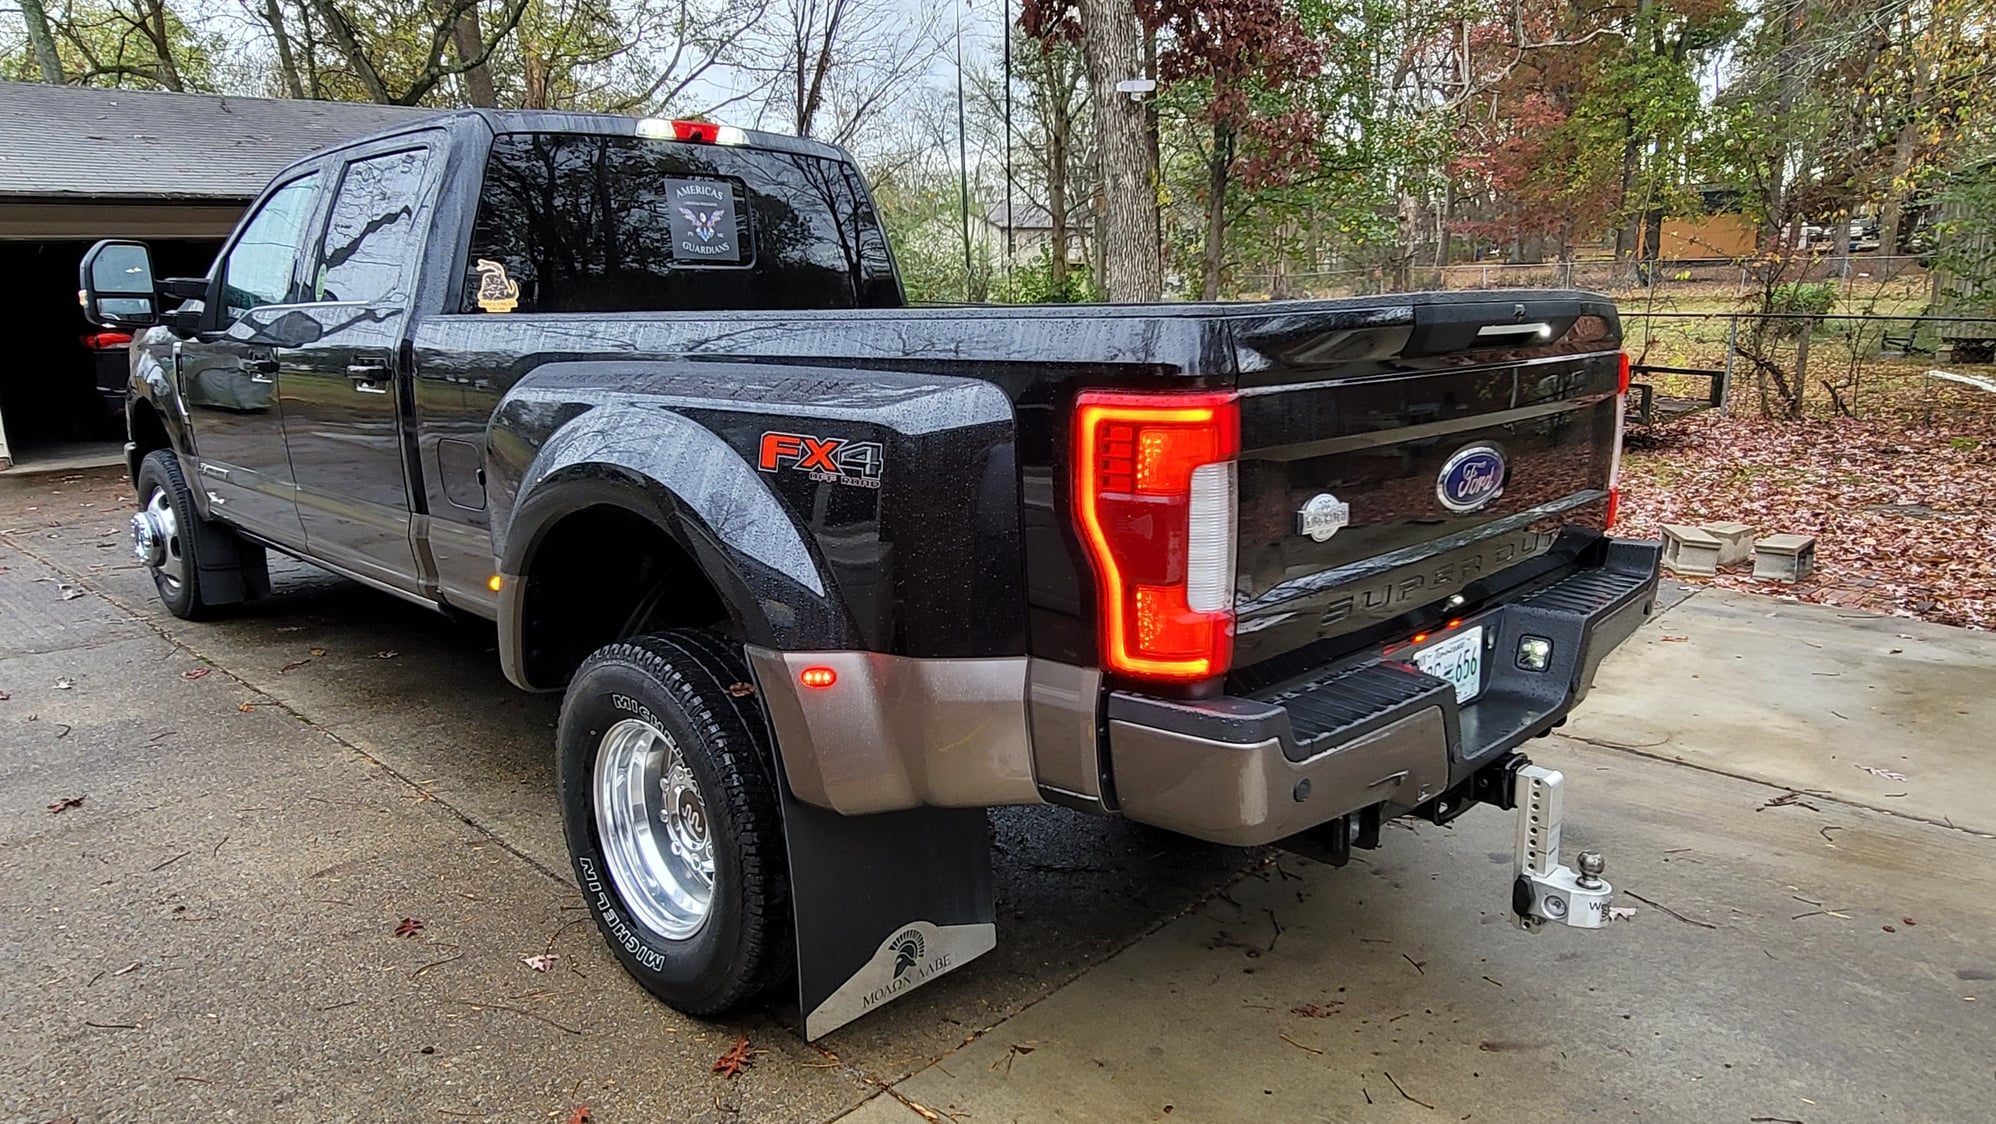 2019 Ford F-350 Super Duty - King Ranch Dually, low mileage with ESP! - Used - VIN 1FT8W3DT0KEE80246 - 35,000 Miles - 8 cyl - 4WD - Automatic - Truck - Black - Clarksville, TN 37042, United States